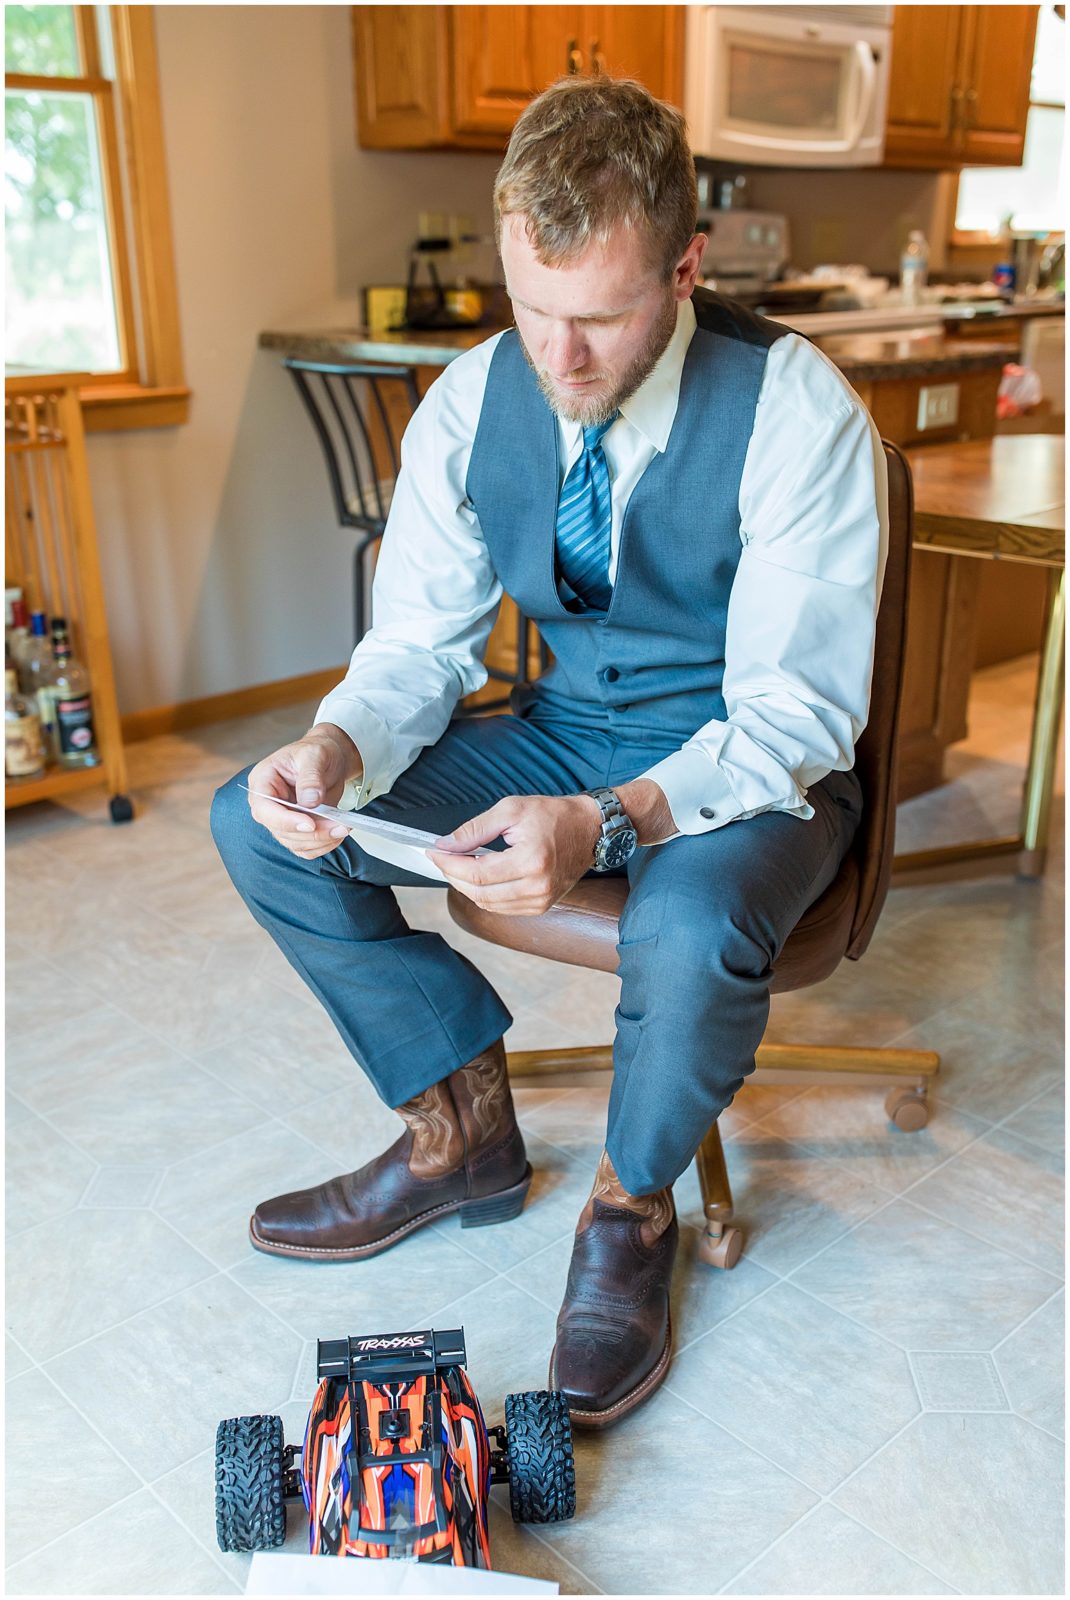 Groom Getting Ready | Avalon Ballroom Wedding in Remsen, IA shot by Jessica Brees Photo & Video